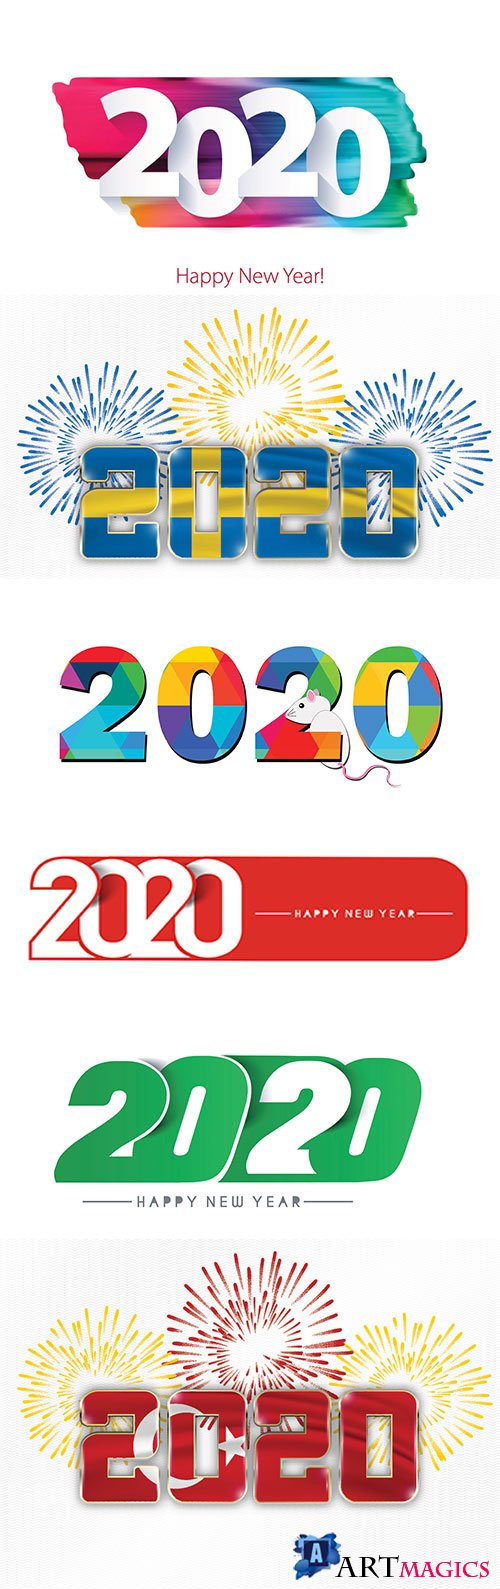 Numbers of new year 2020